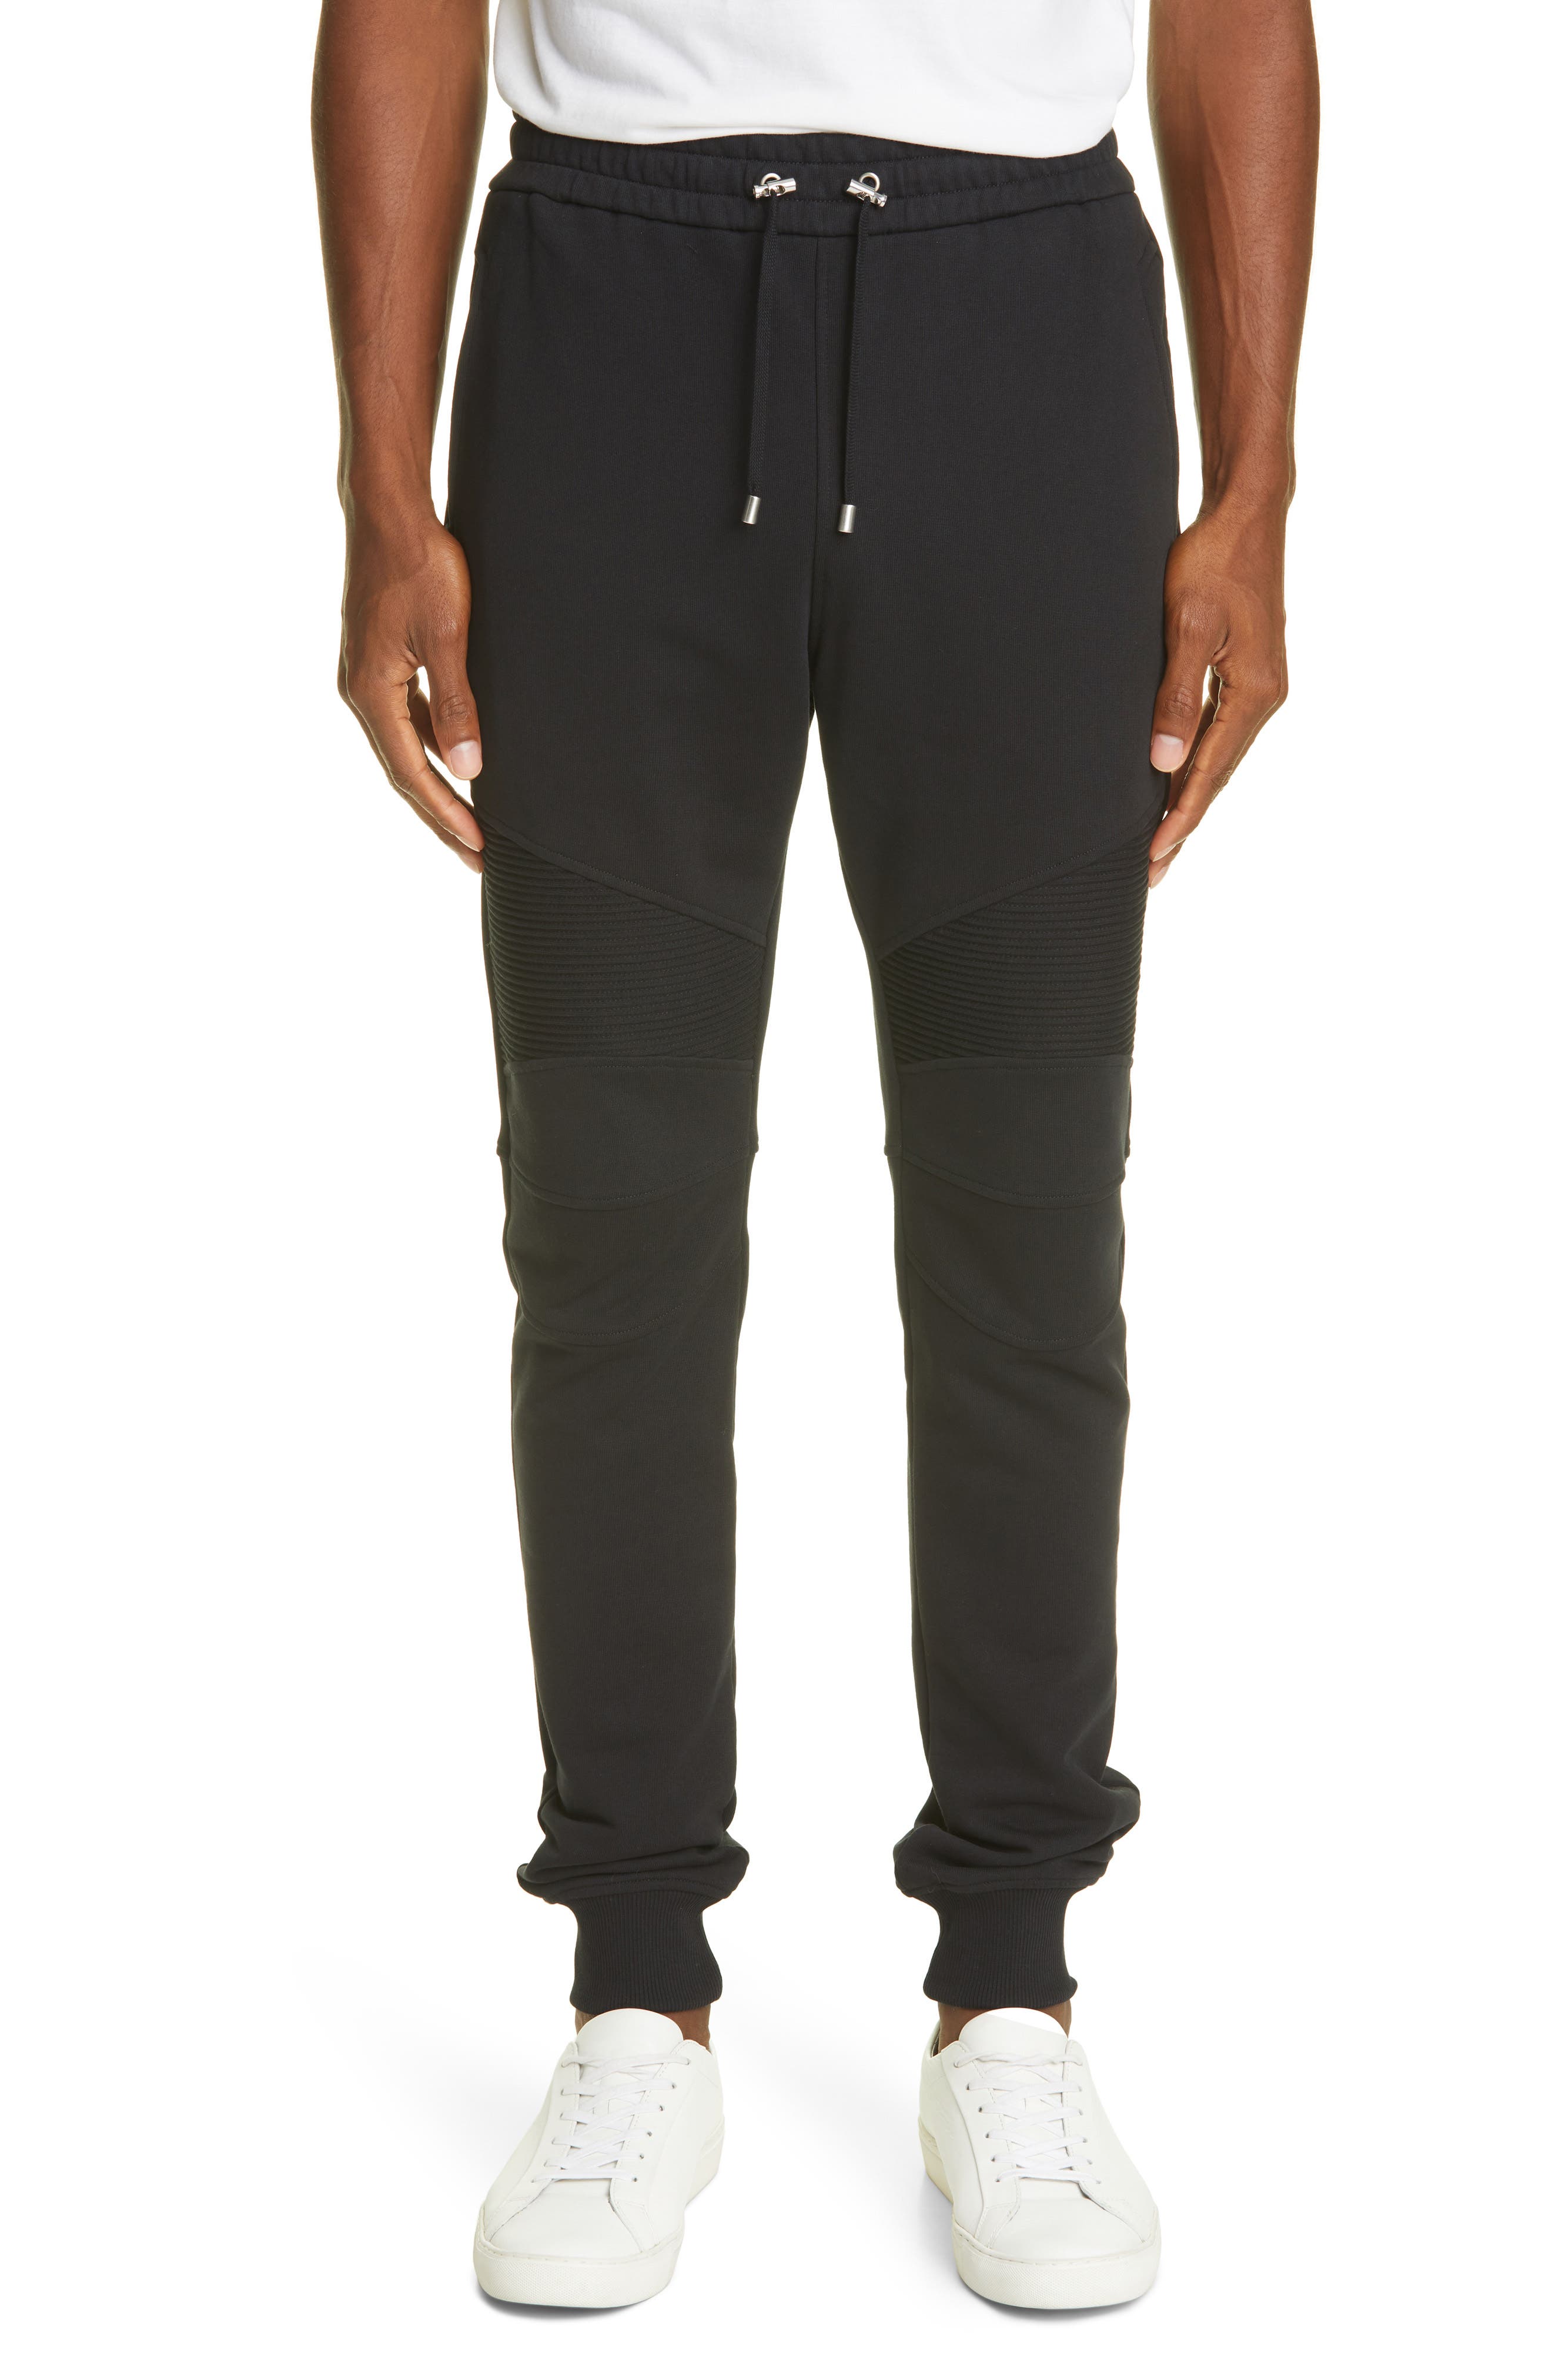 Balmain Ribbed Cotton Joggers in Black/Gold at Nordstrom, Size X-Large Us